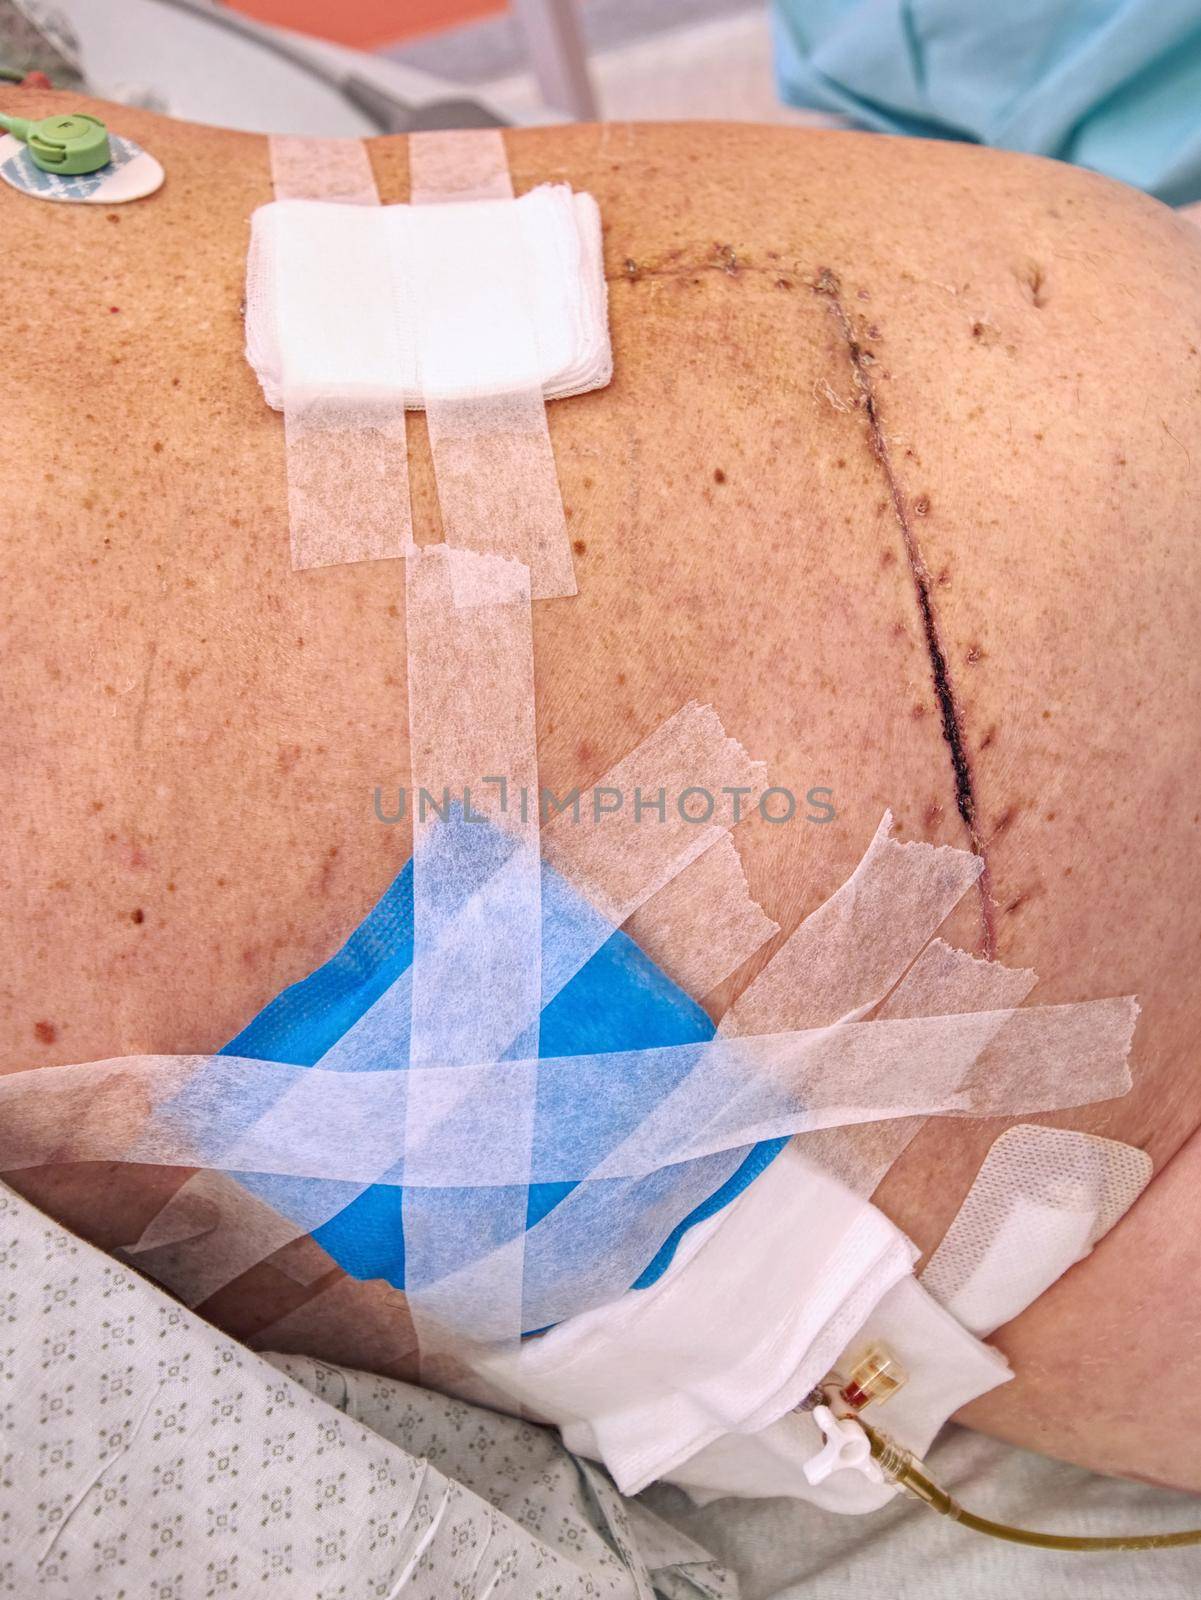 The patient shows a fresh, large scar after bowel and liver surgery and plastic tubing to remove lime and pus.